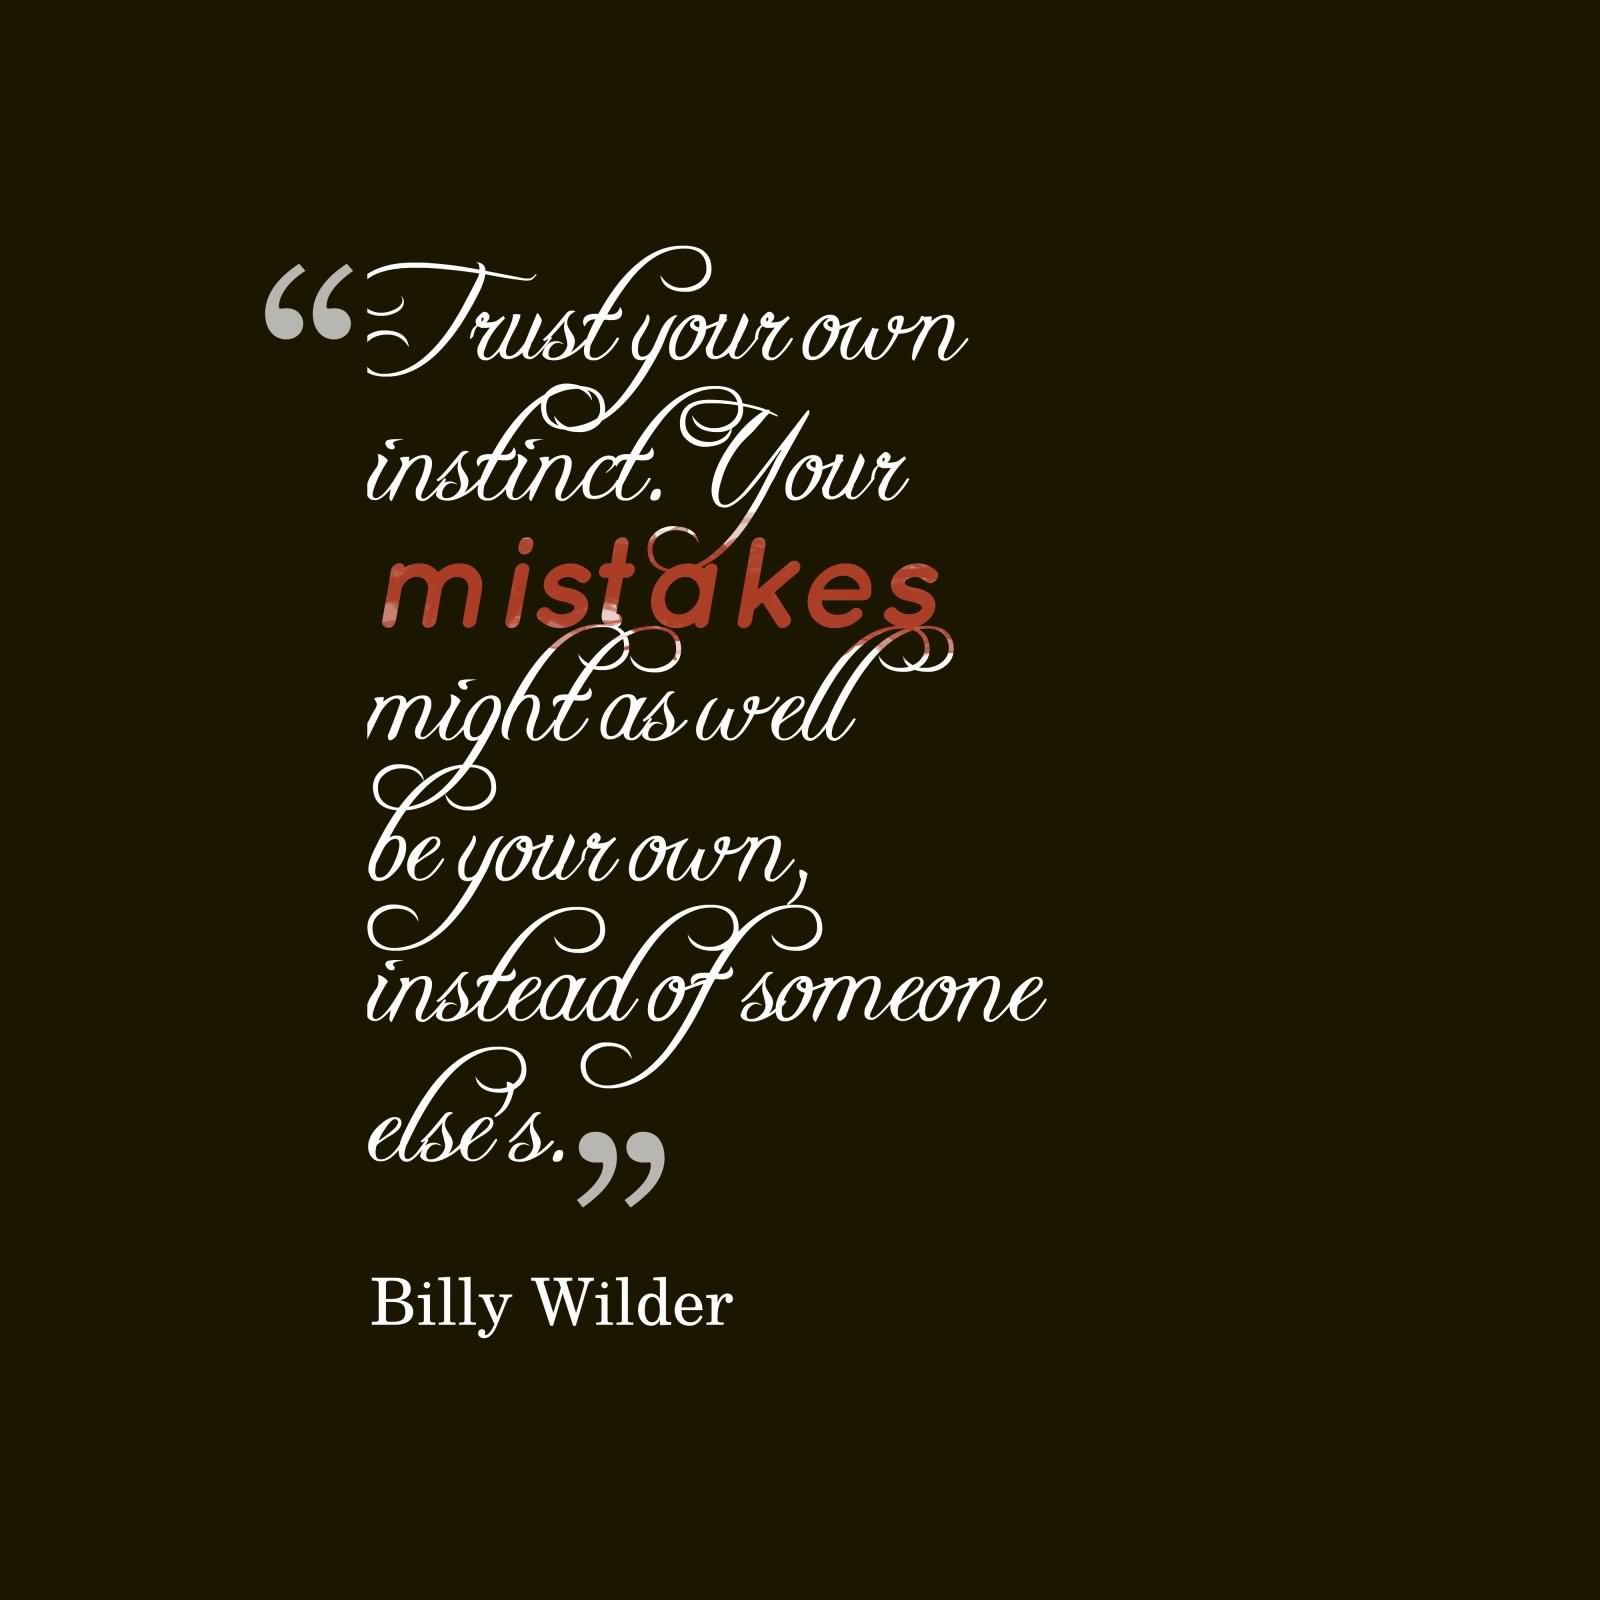 Trust your own instinct. Your mistakes might as well be your own instead of someone else’s.